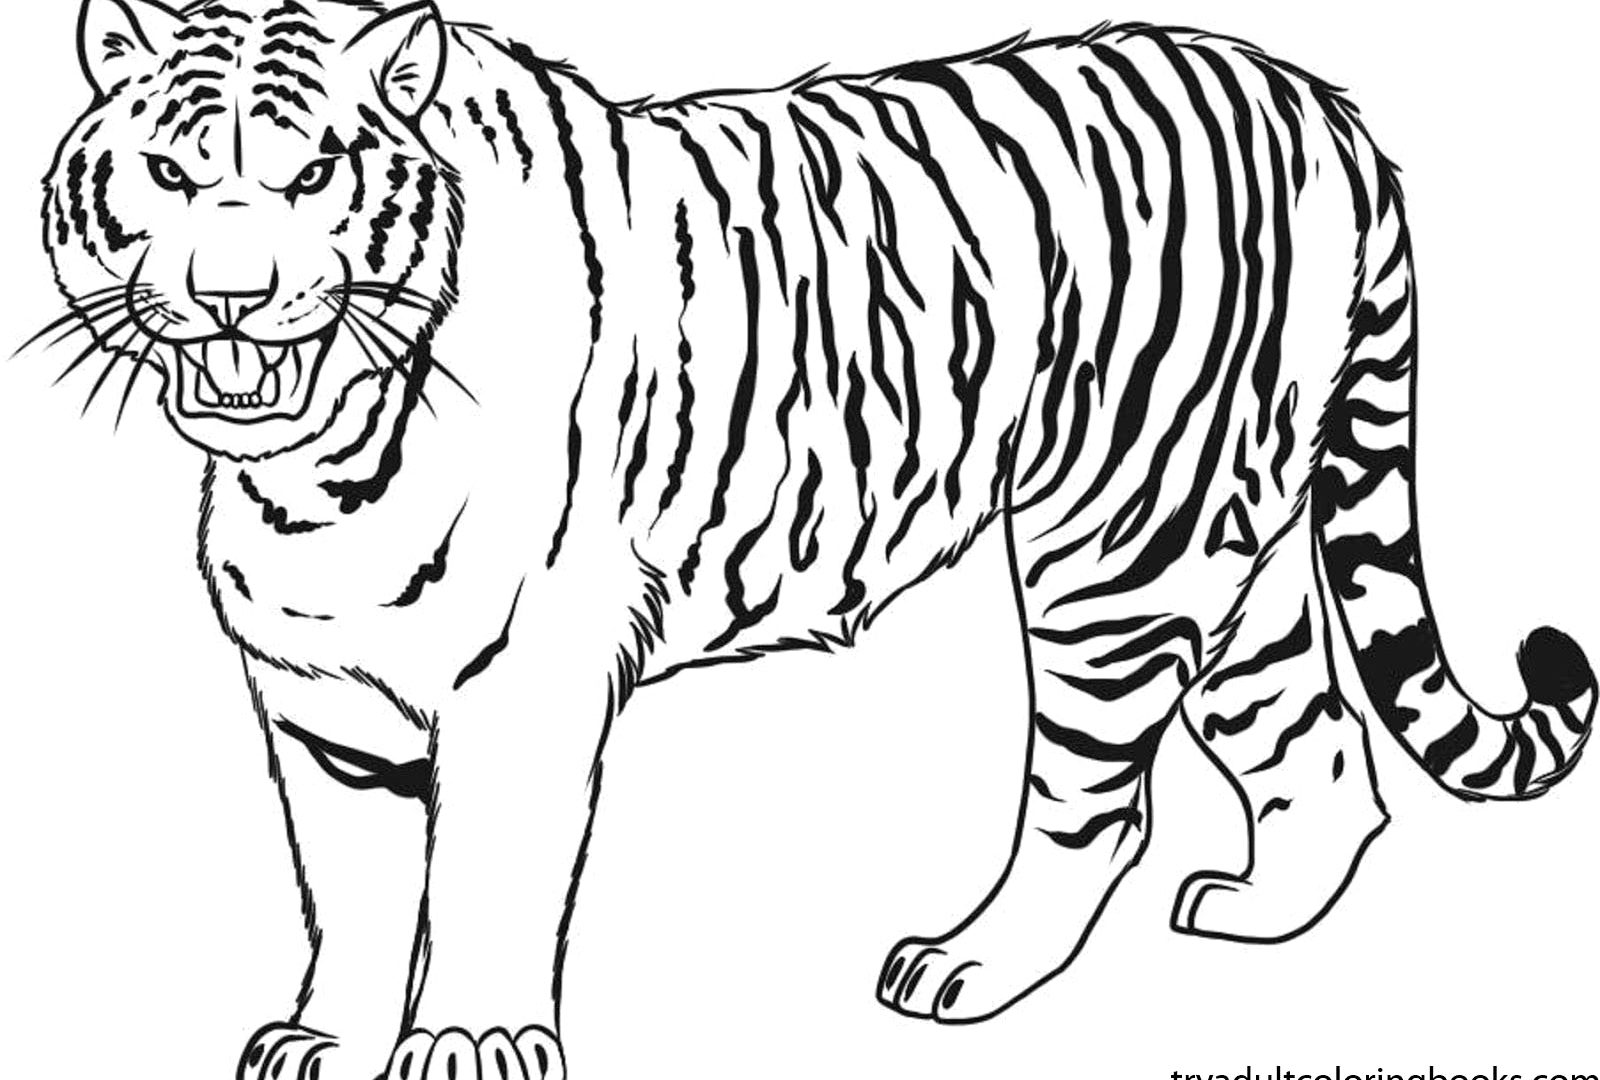 6. Black and White Siberian Tiger Tattoos - wide 1